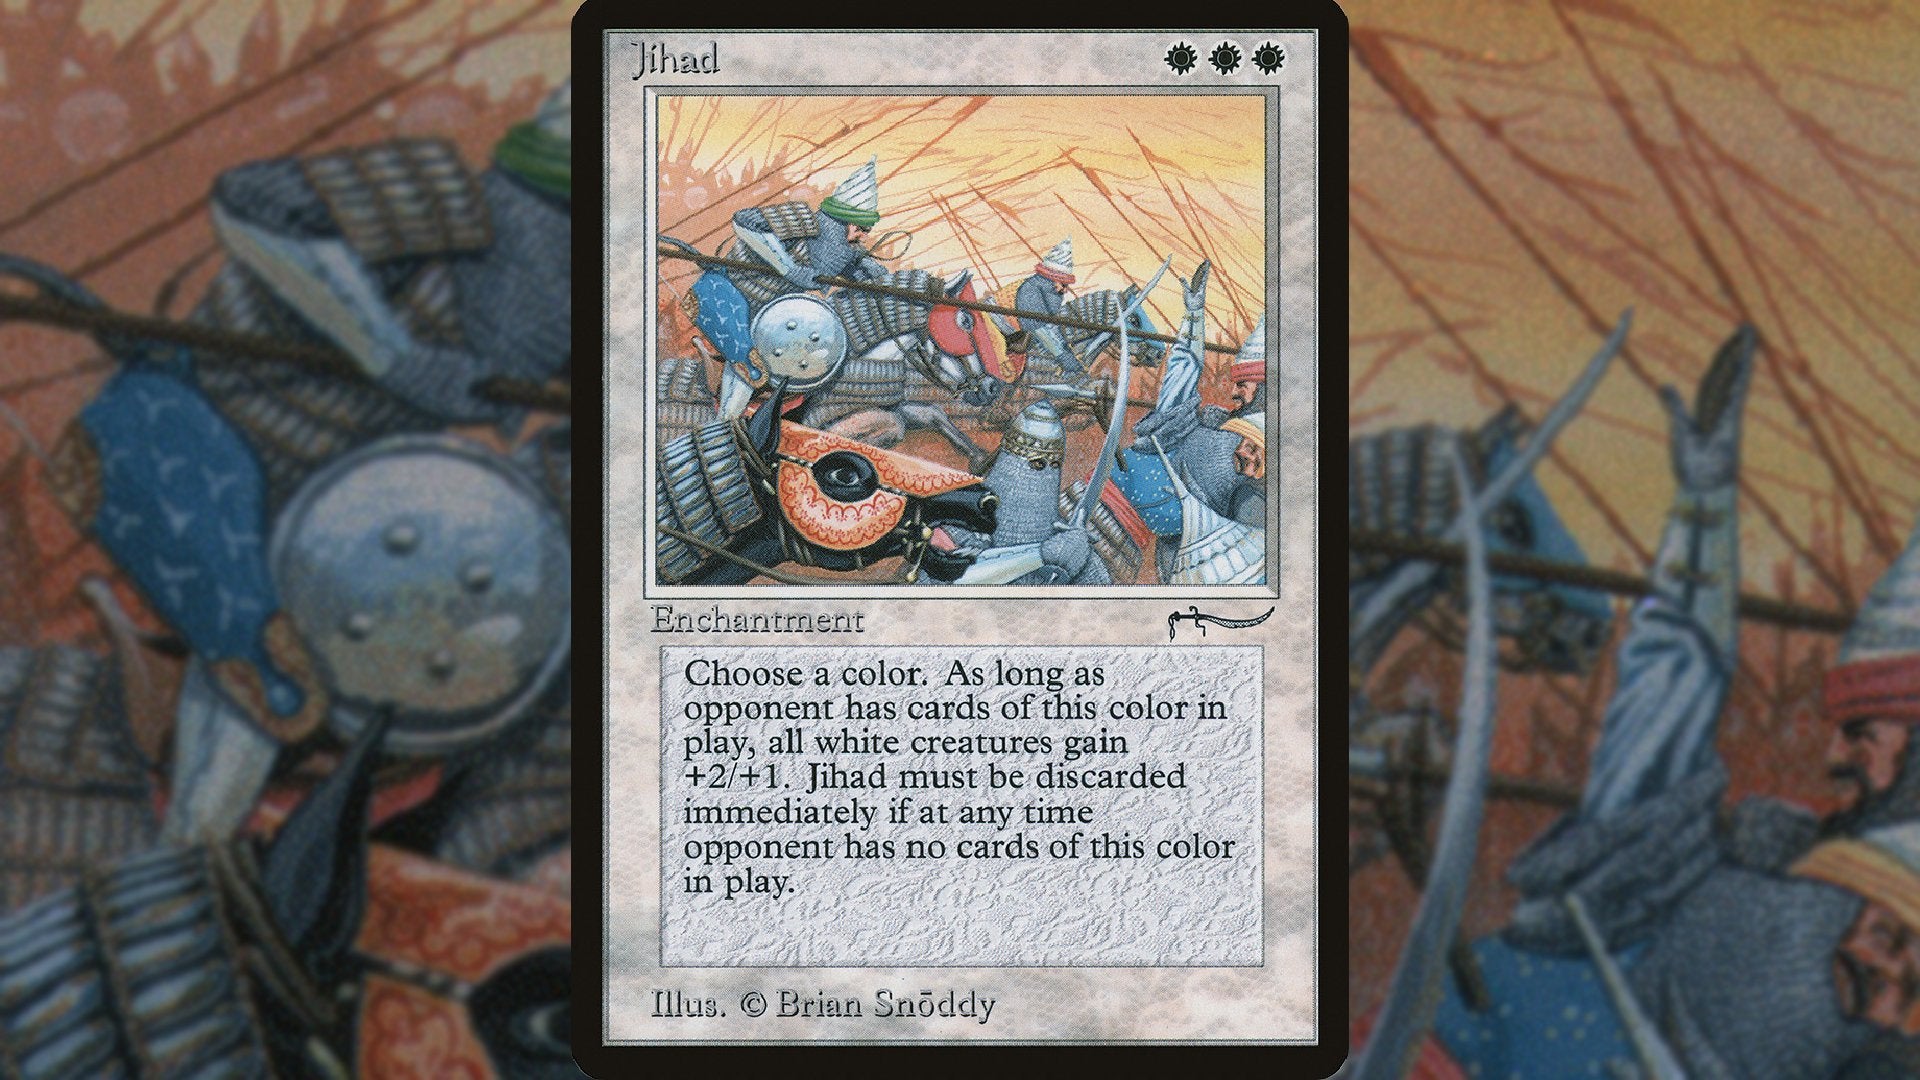 The Jihad card in MTG, which features a group of armed warriors riding horses.